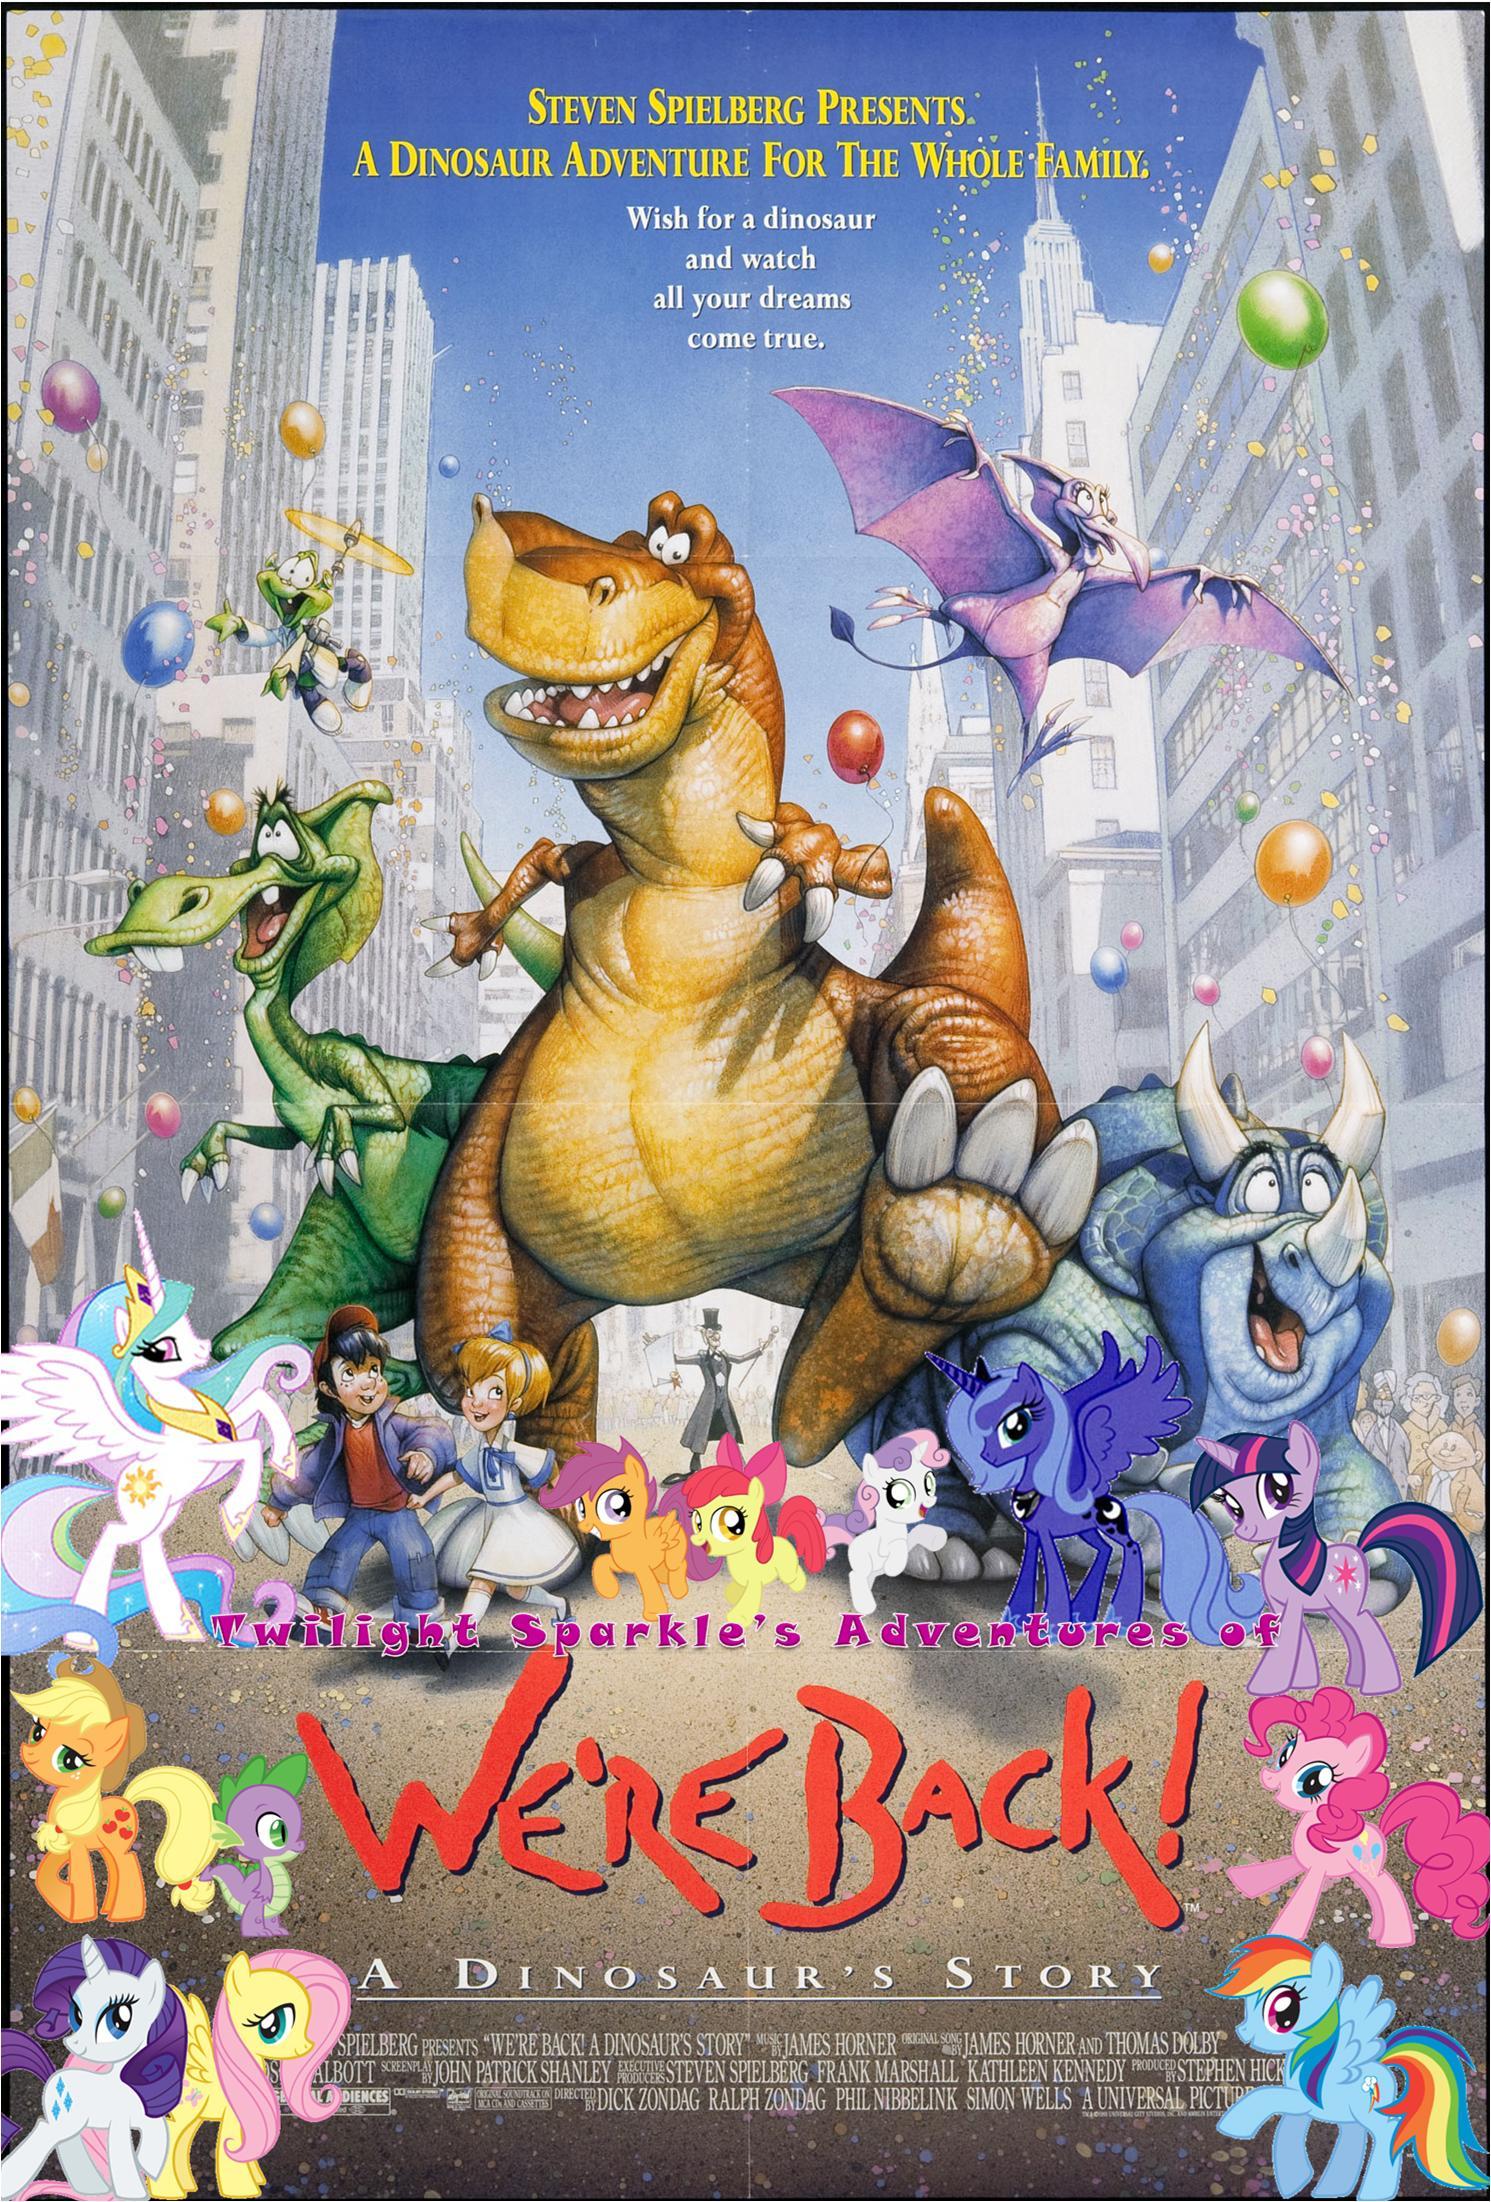 Twilight Sparkles Adventures of Were Back: A Dinosaurs Story - Pooh.